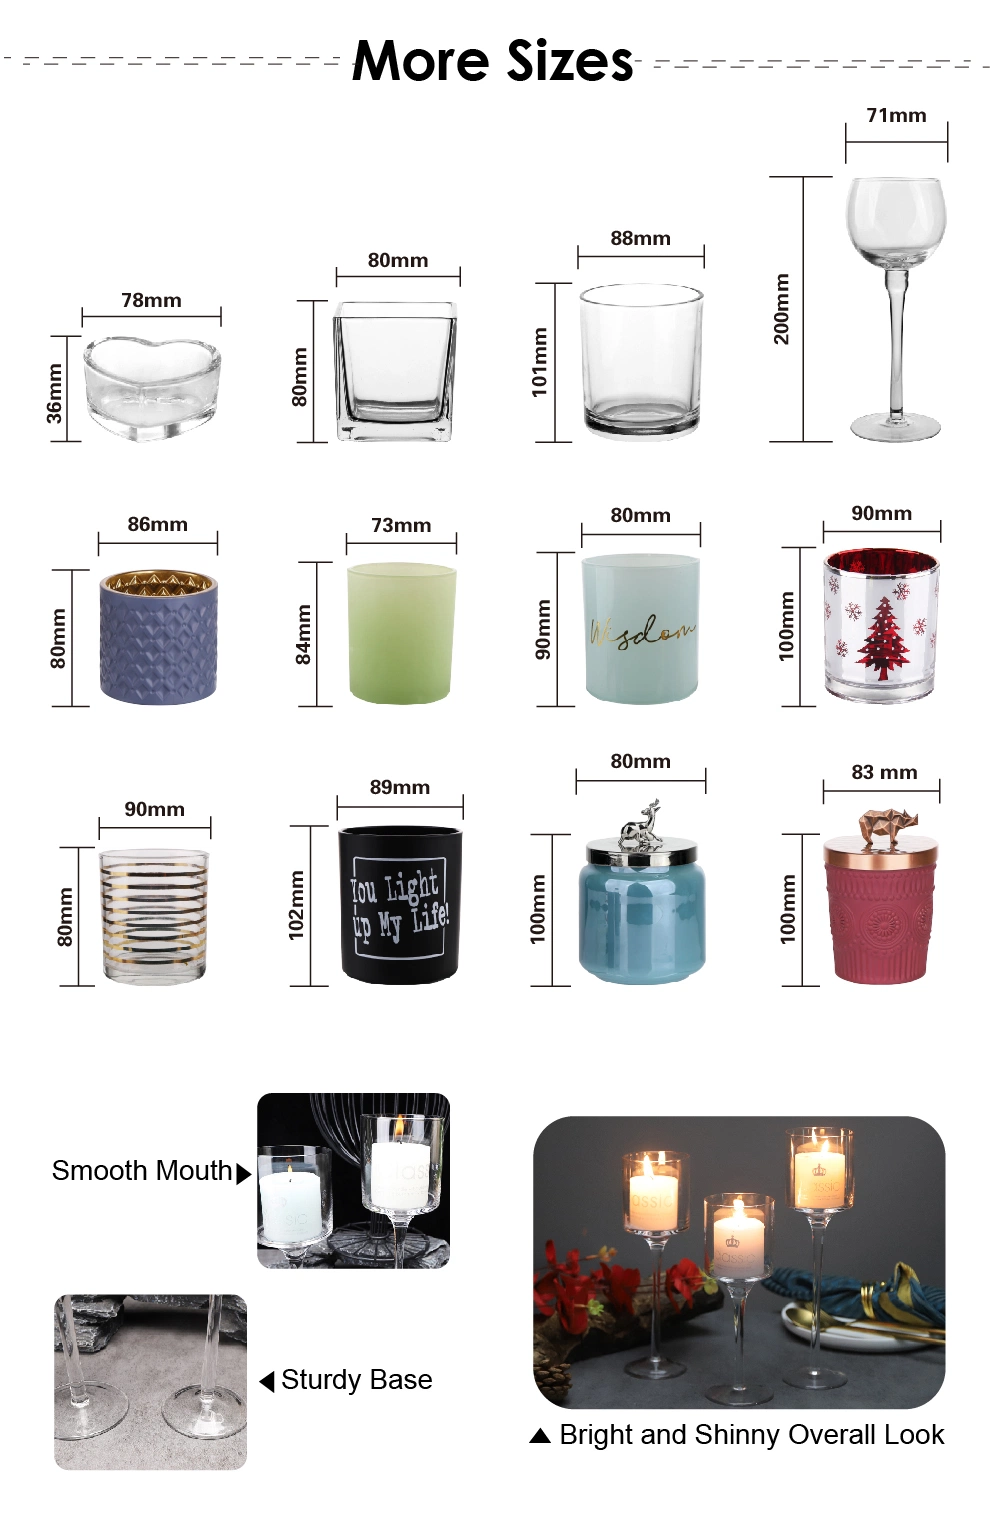 Wholesale Cheap Custom Embossed Design Machine Made Clear Glass Candle Holder Votive Cup